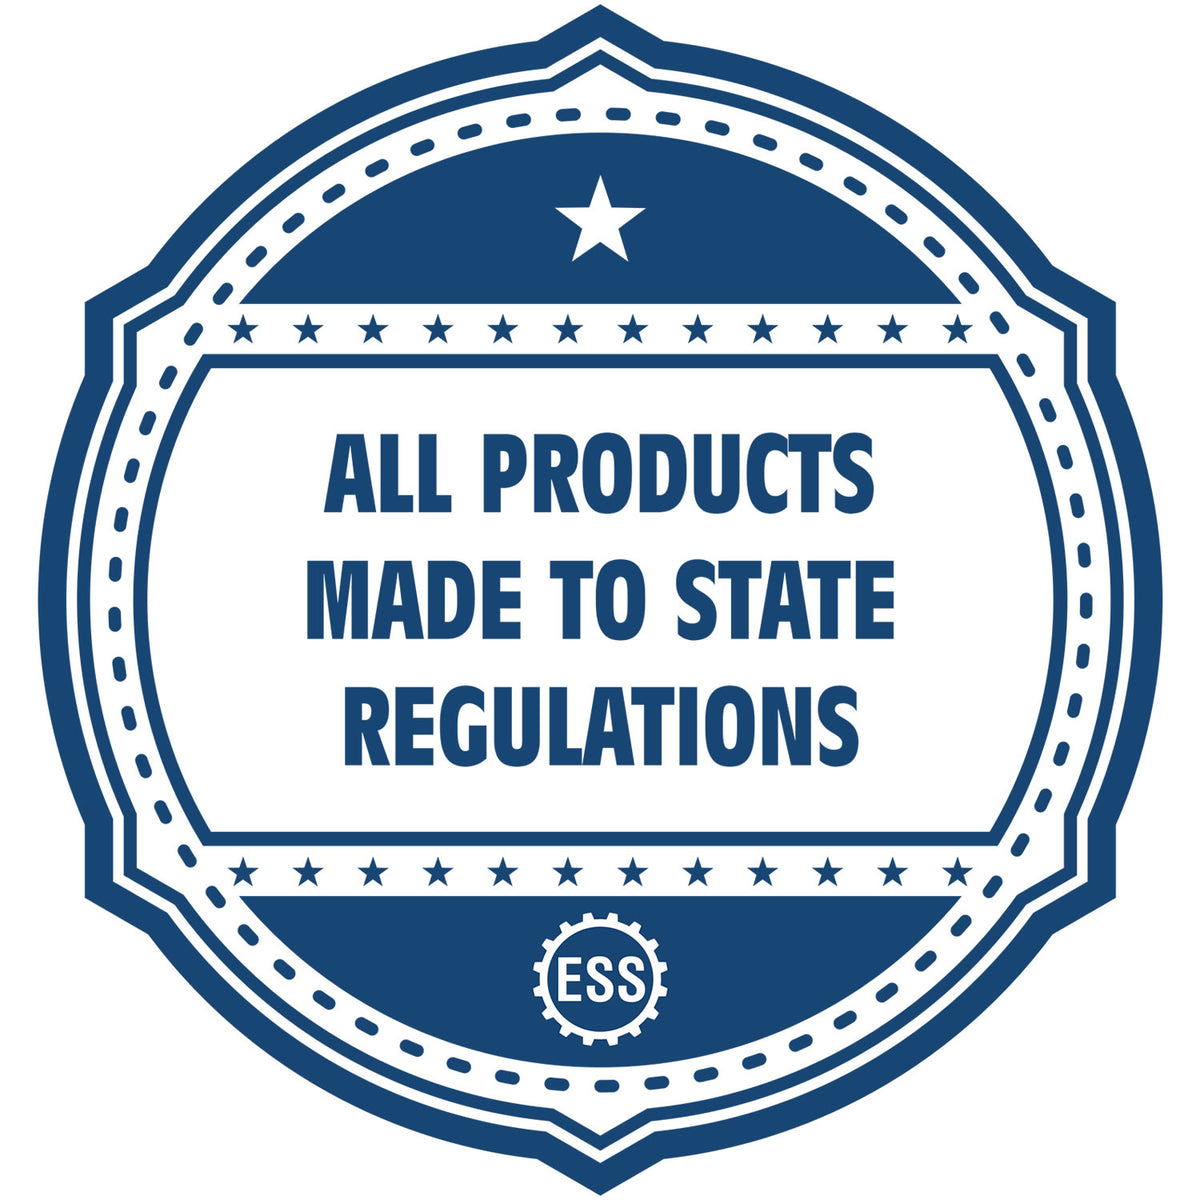 A blue icon or badge for the Gift Arizona Engineer Seal showing that this product is made in compliance with state regulations.